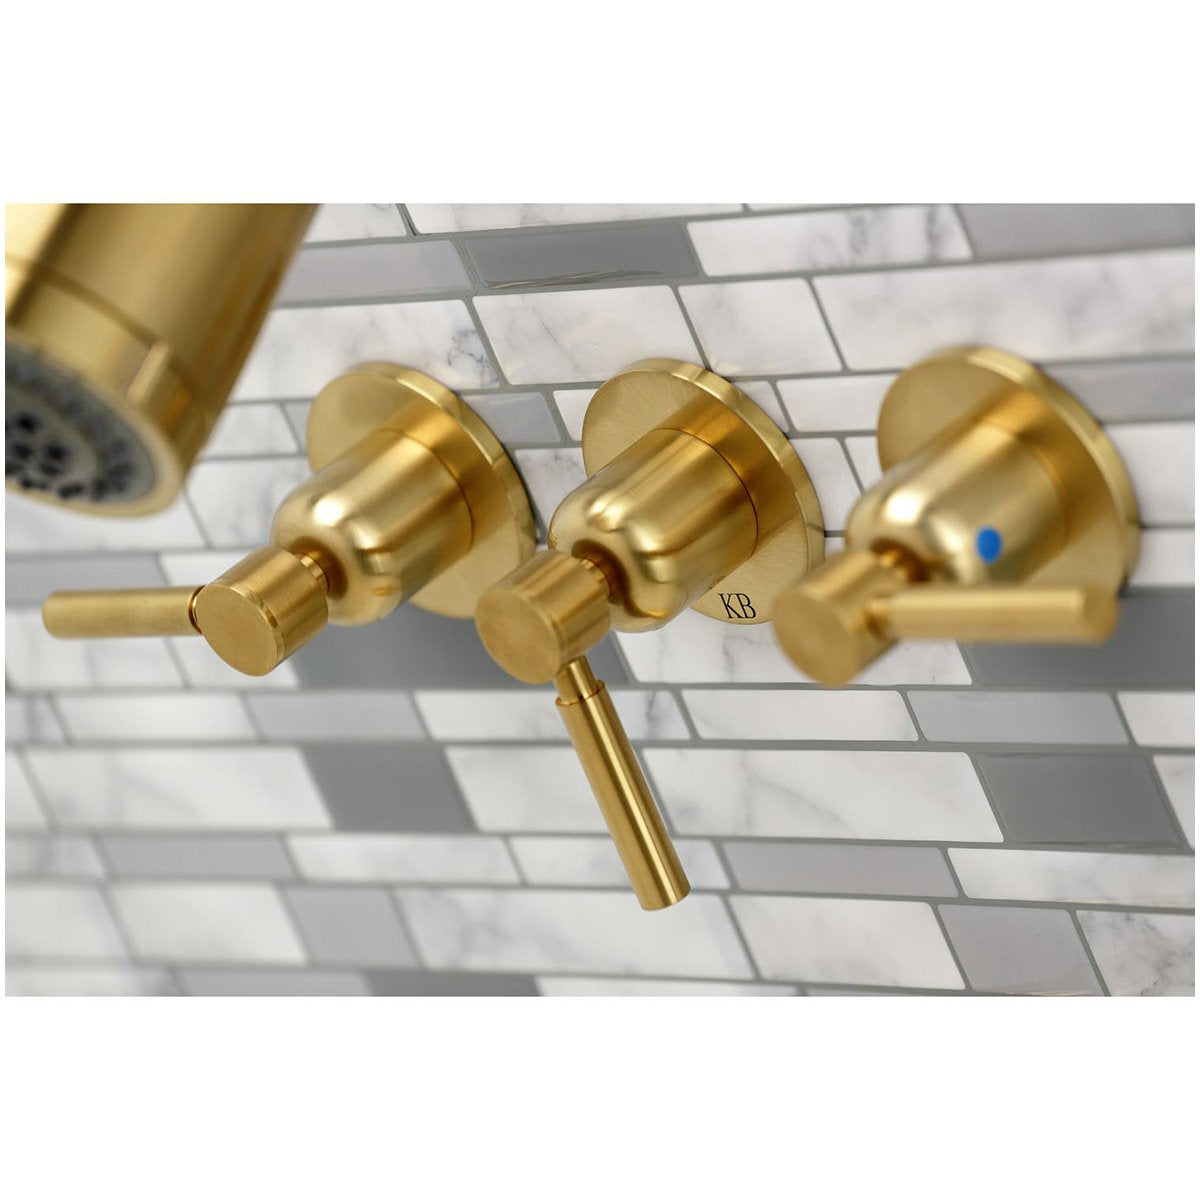 Kingston Brass Concord 7.13" x 14.13" Three-Handle Tub and Shower Faucet